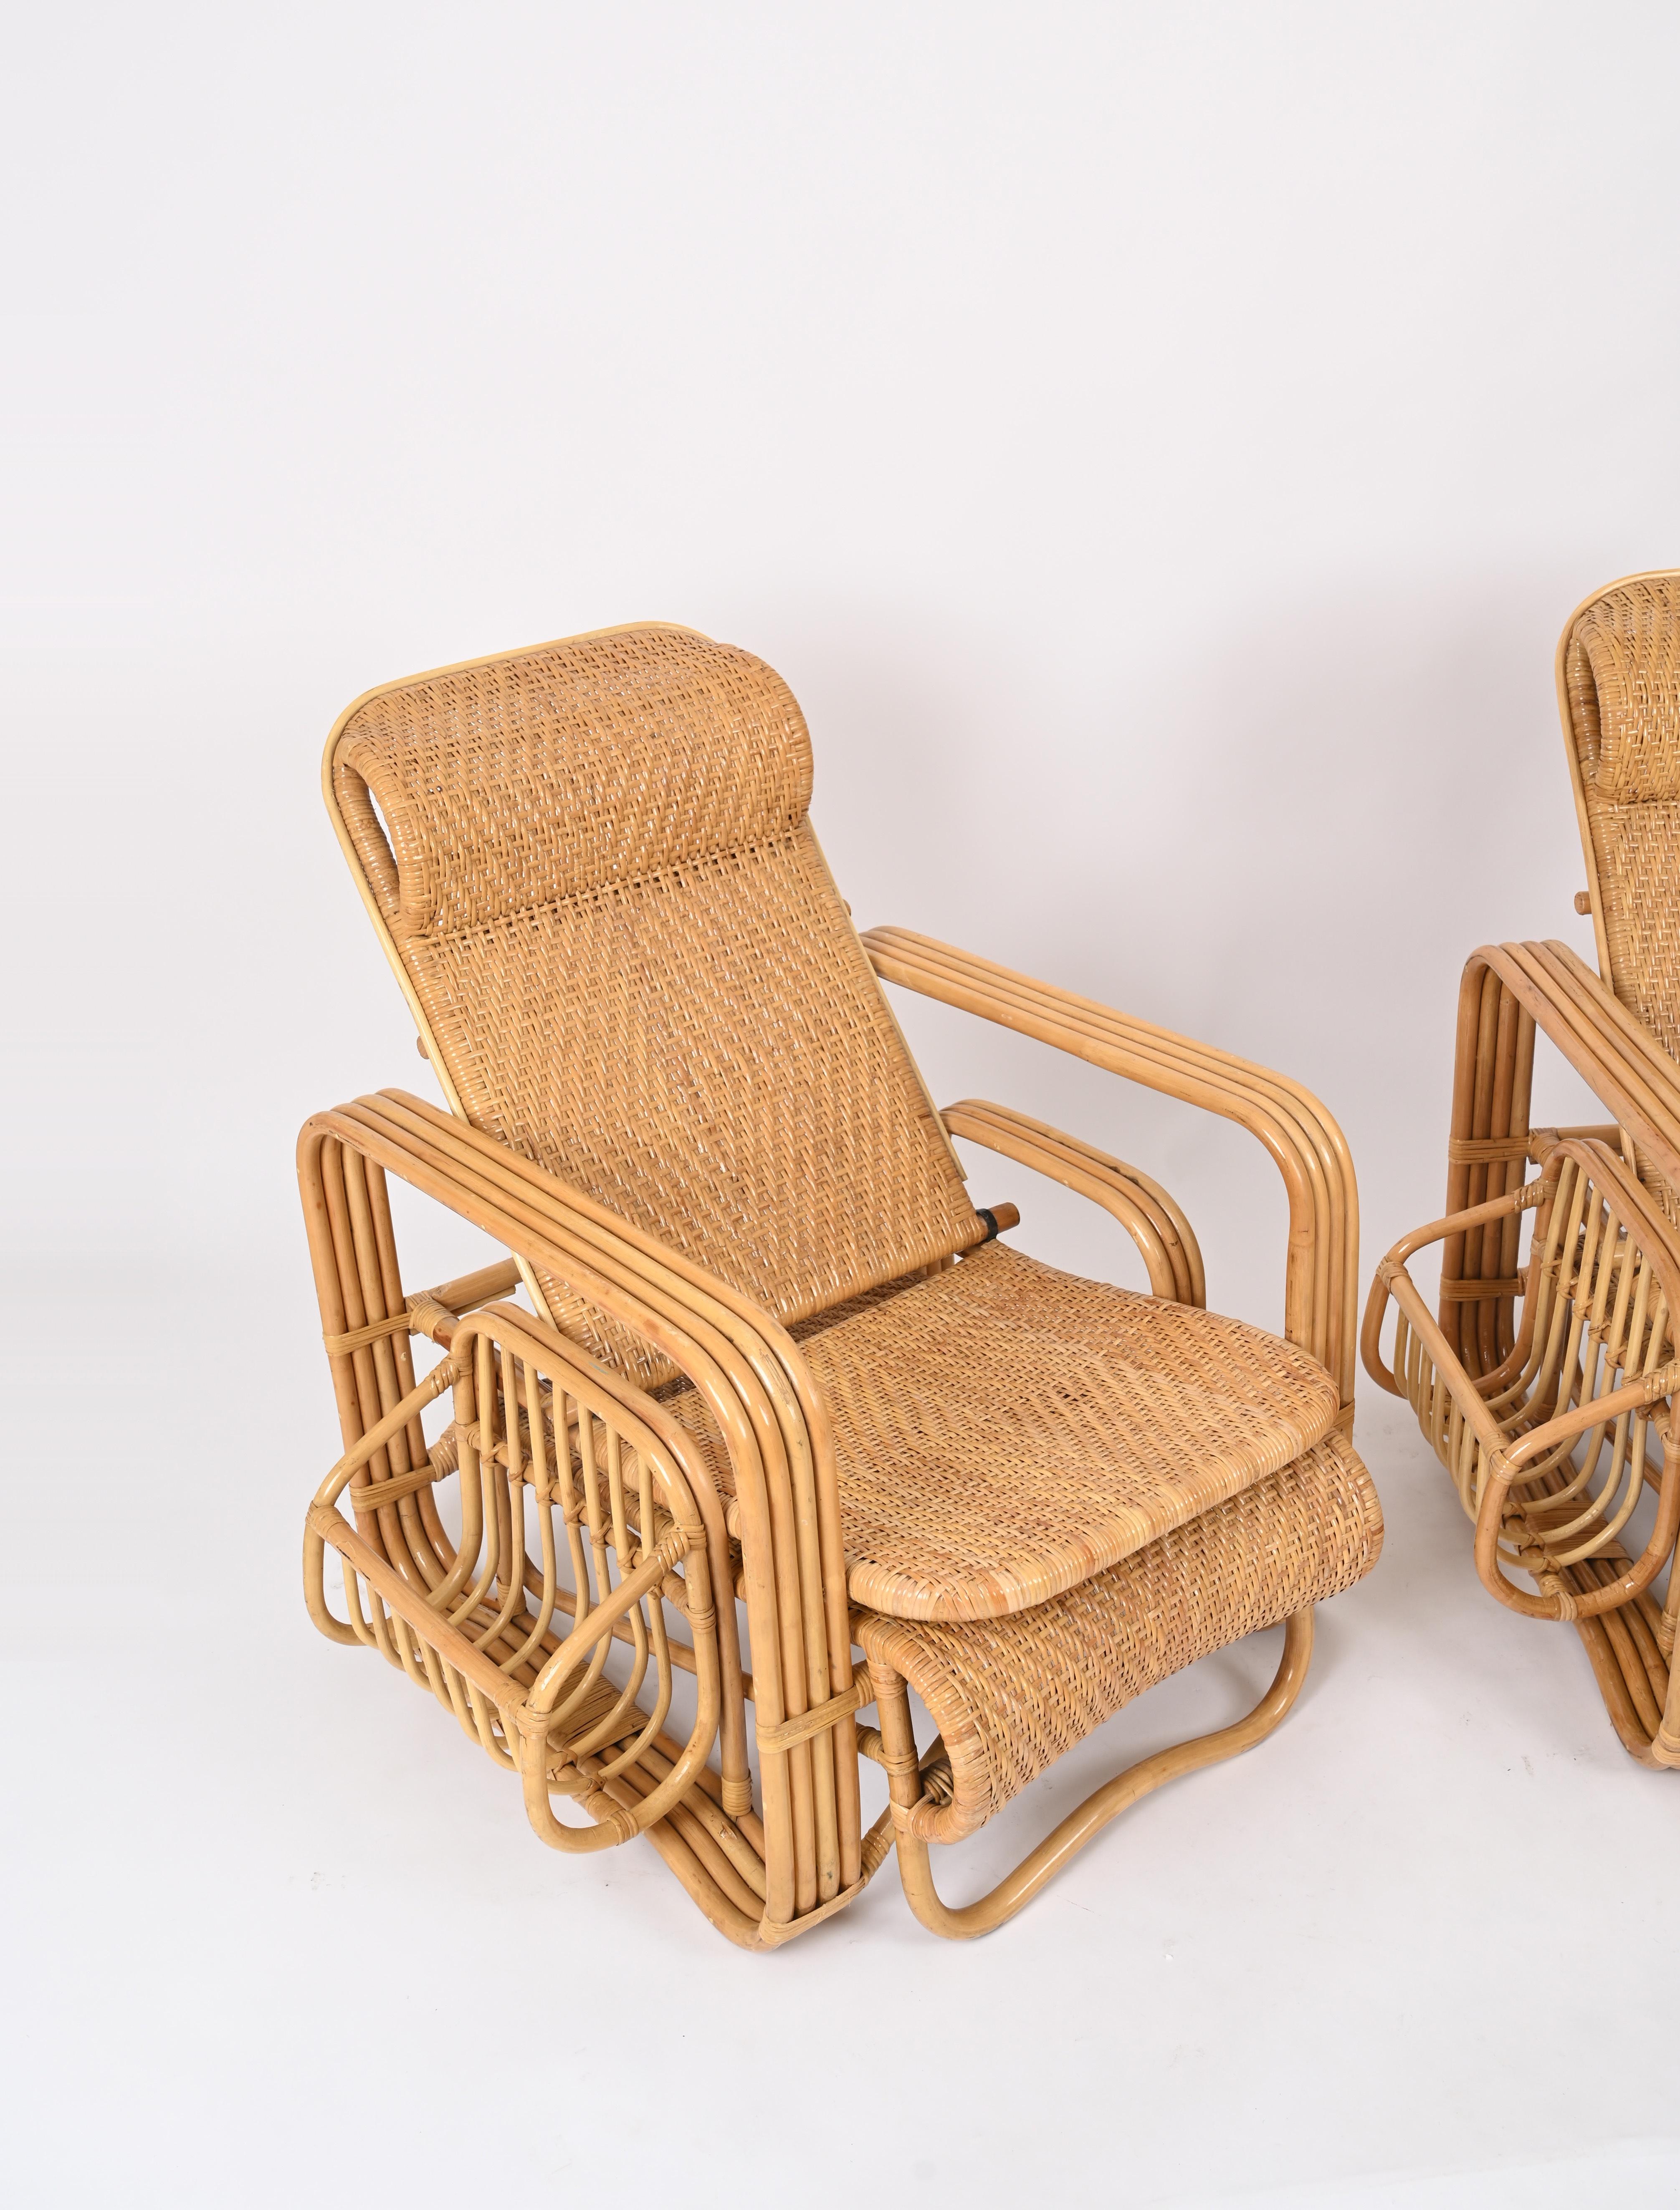 Pair of Adjustable Chaise Longue / Lounge Chairs, Wicker and Rattan, Italy '70s  For Sale 7